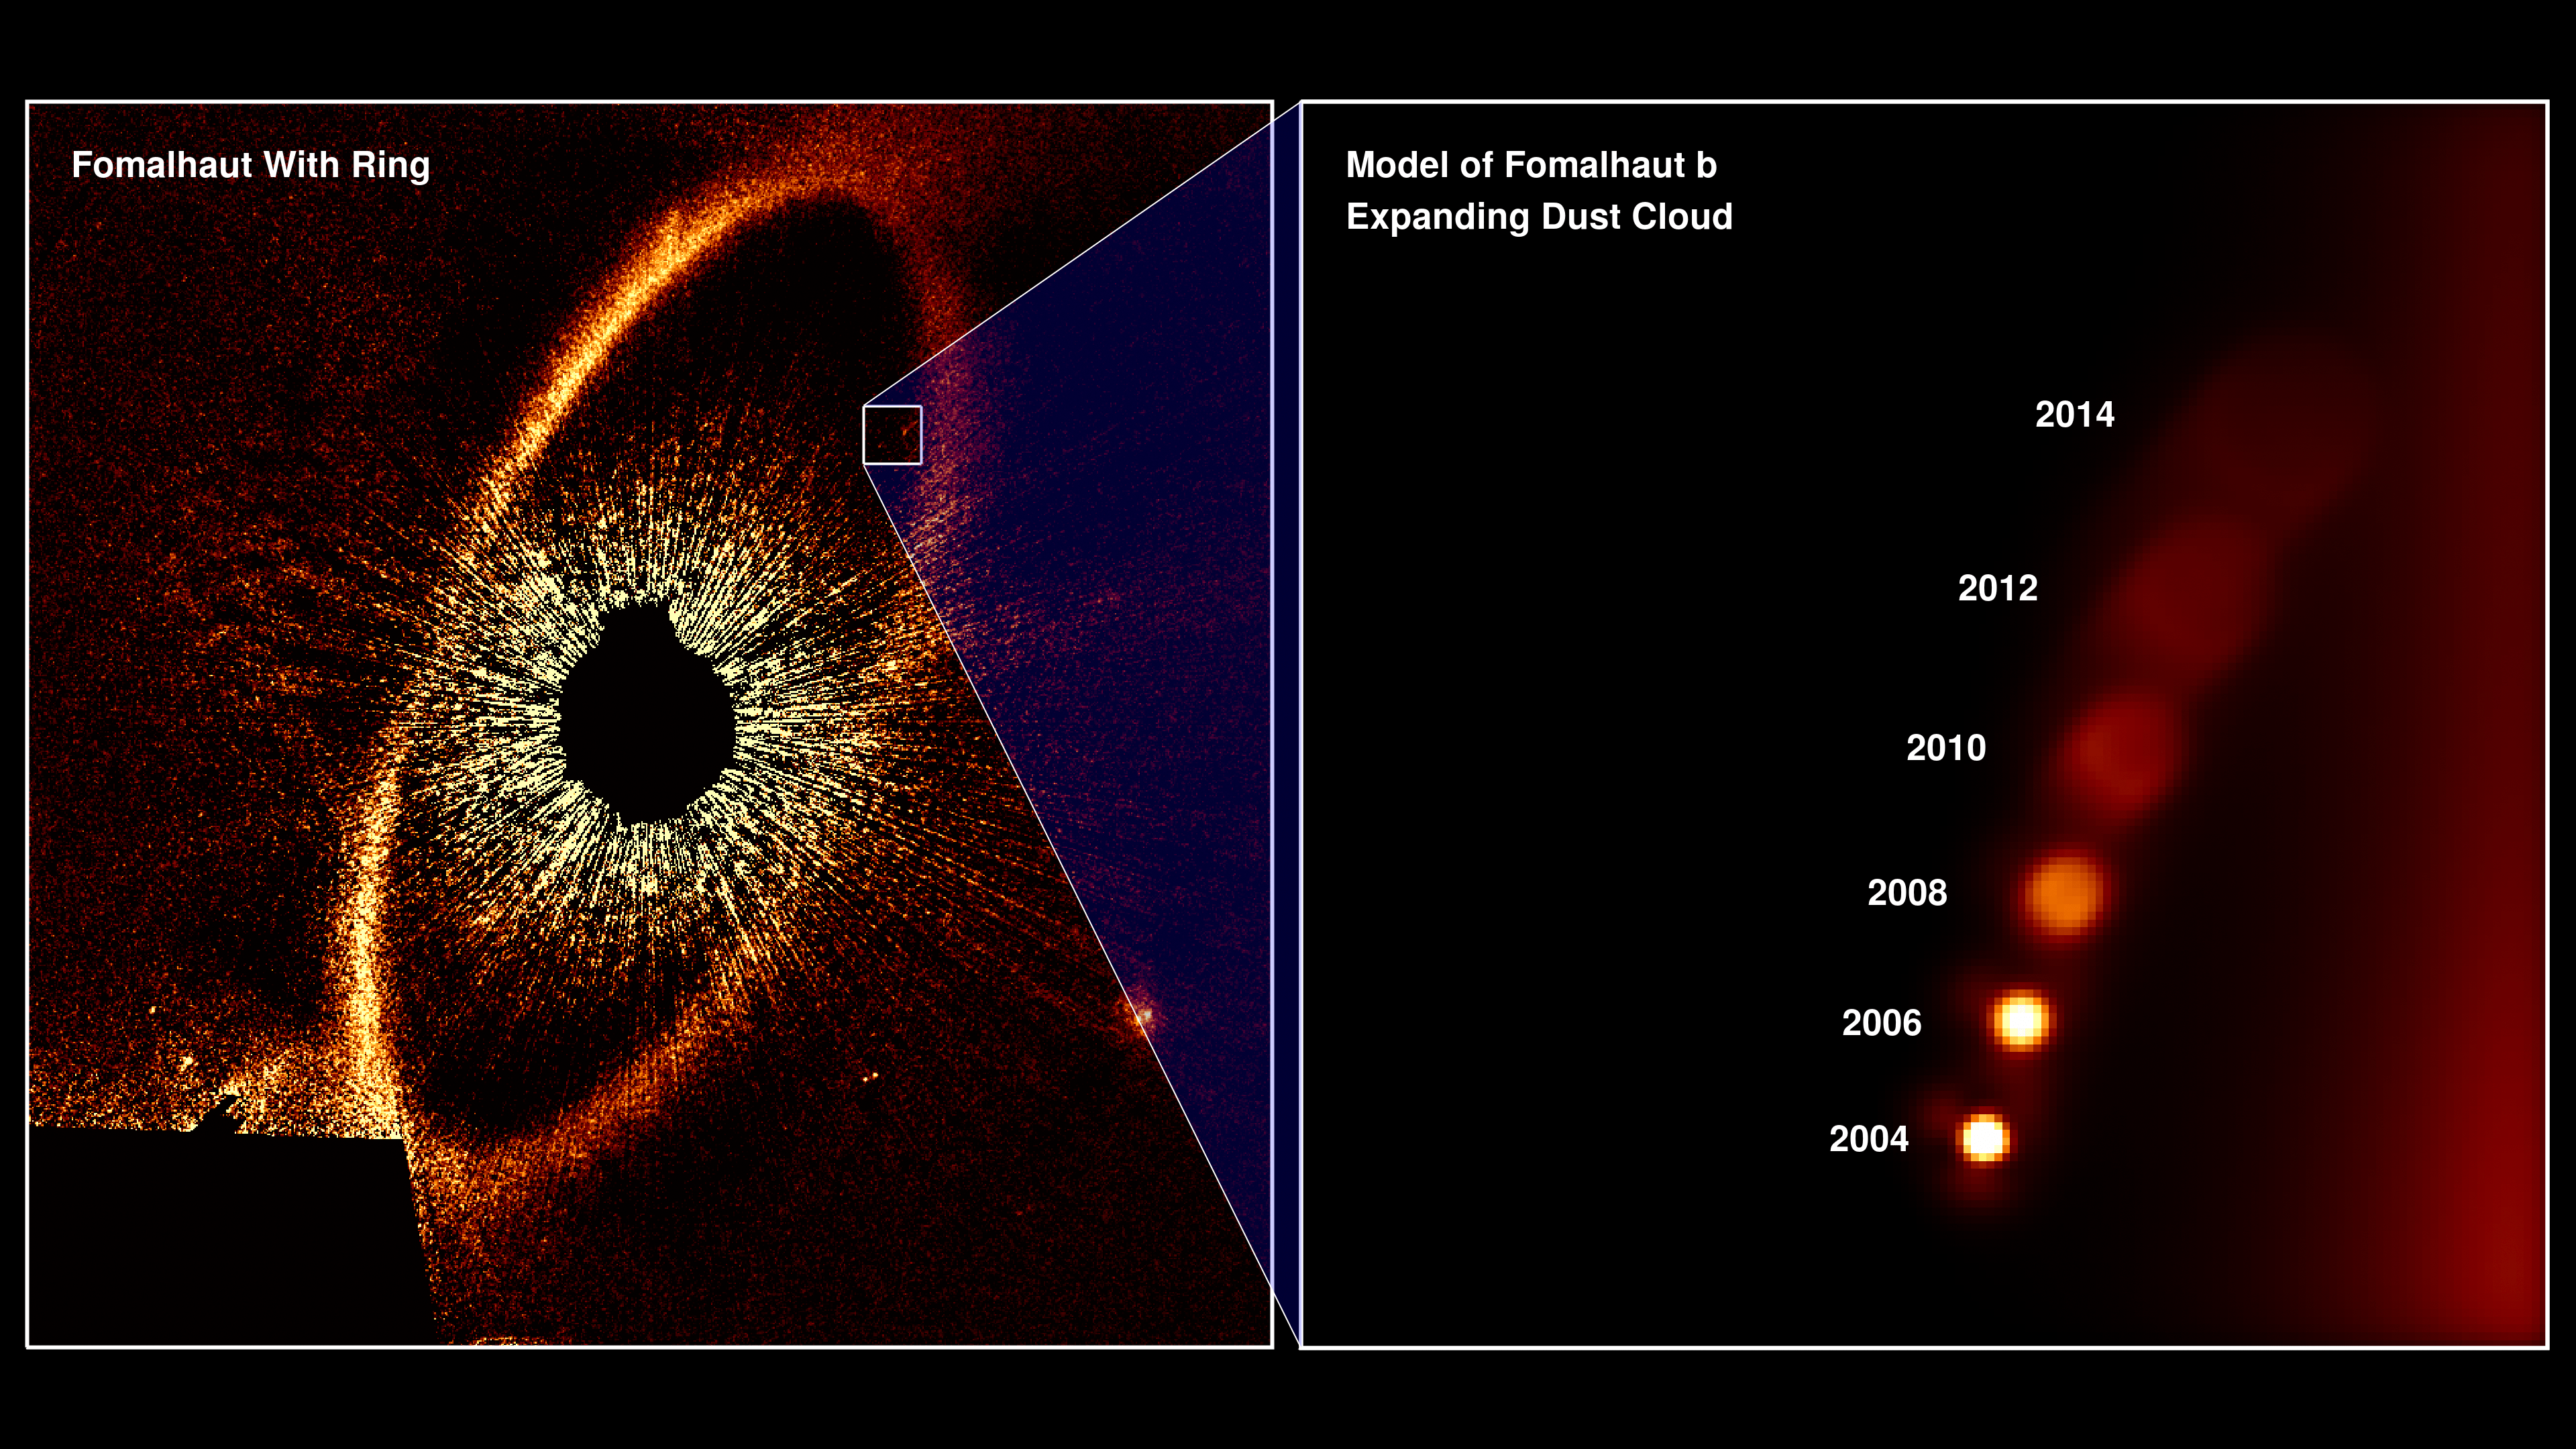 Hubble observations and data simulation of Fomalhaut star system